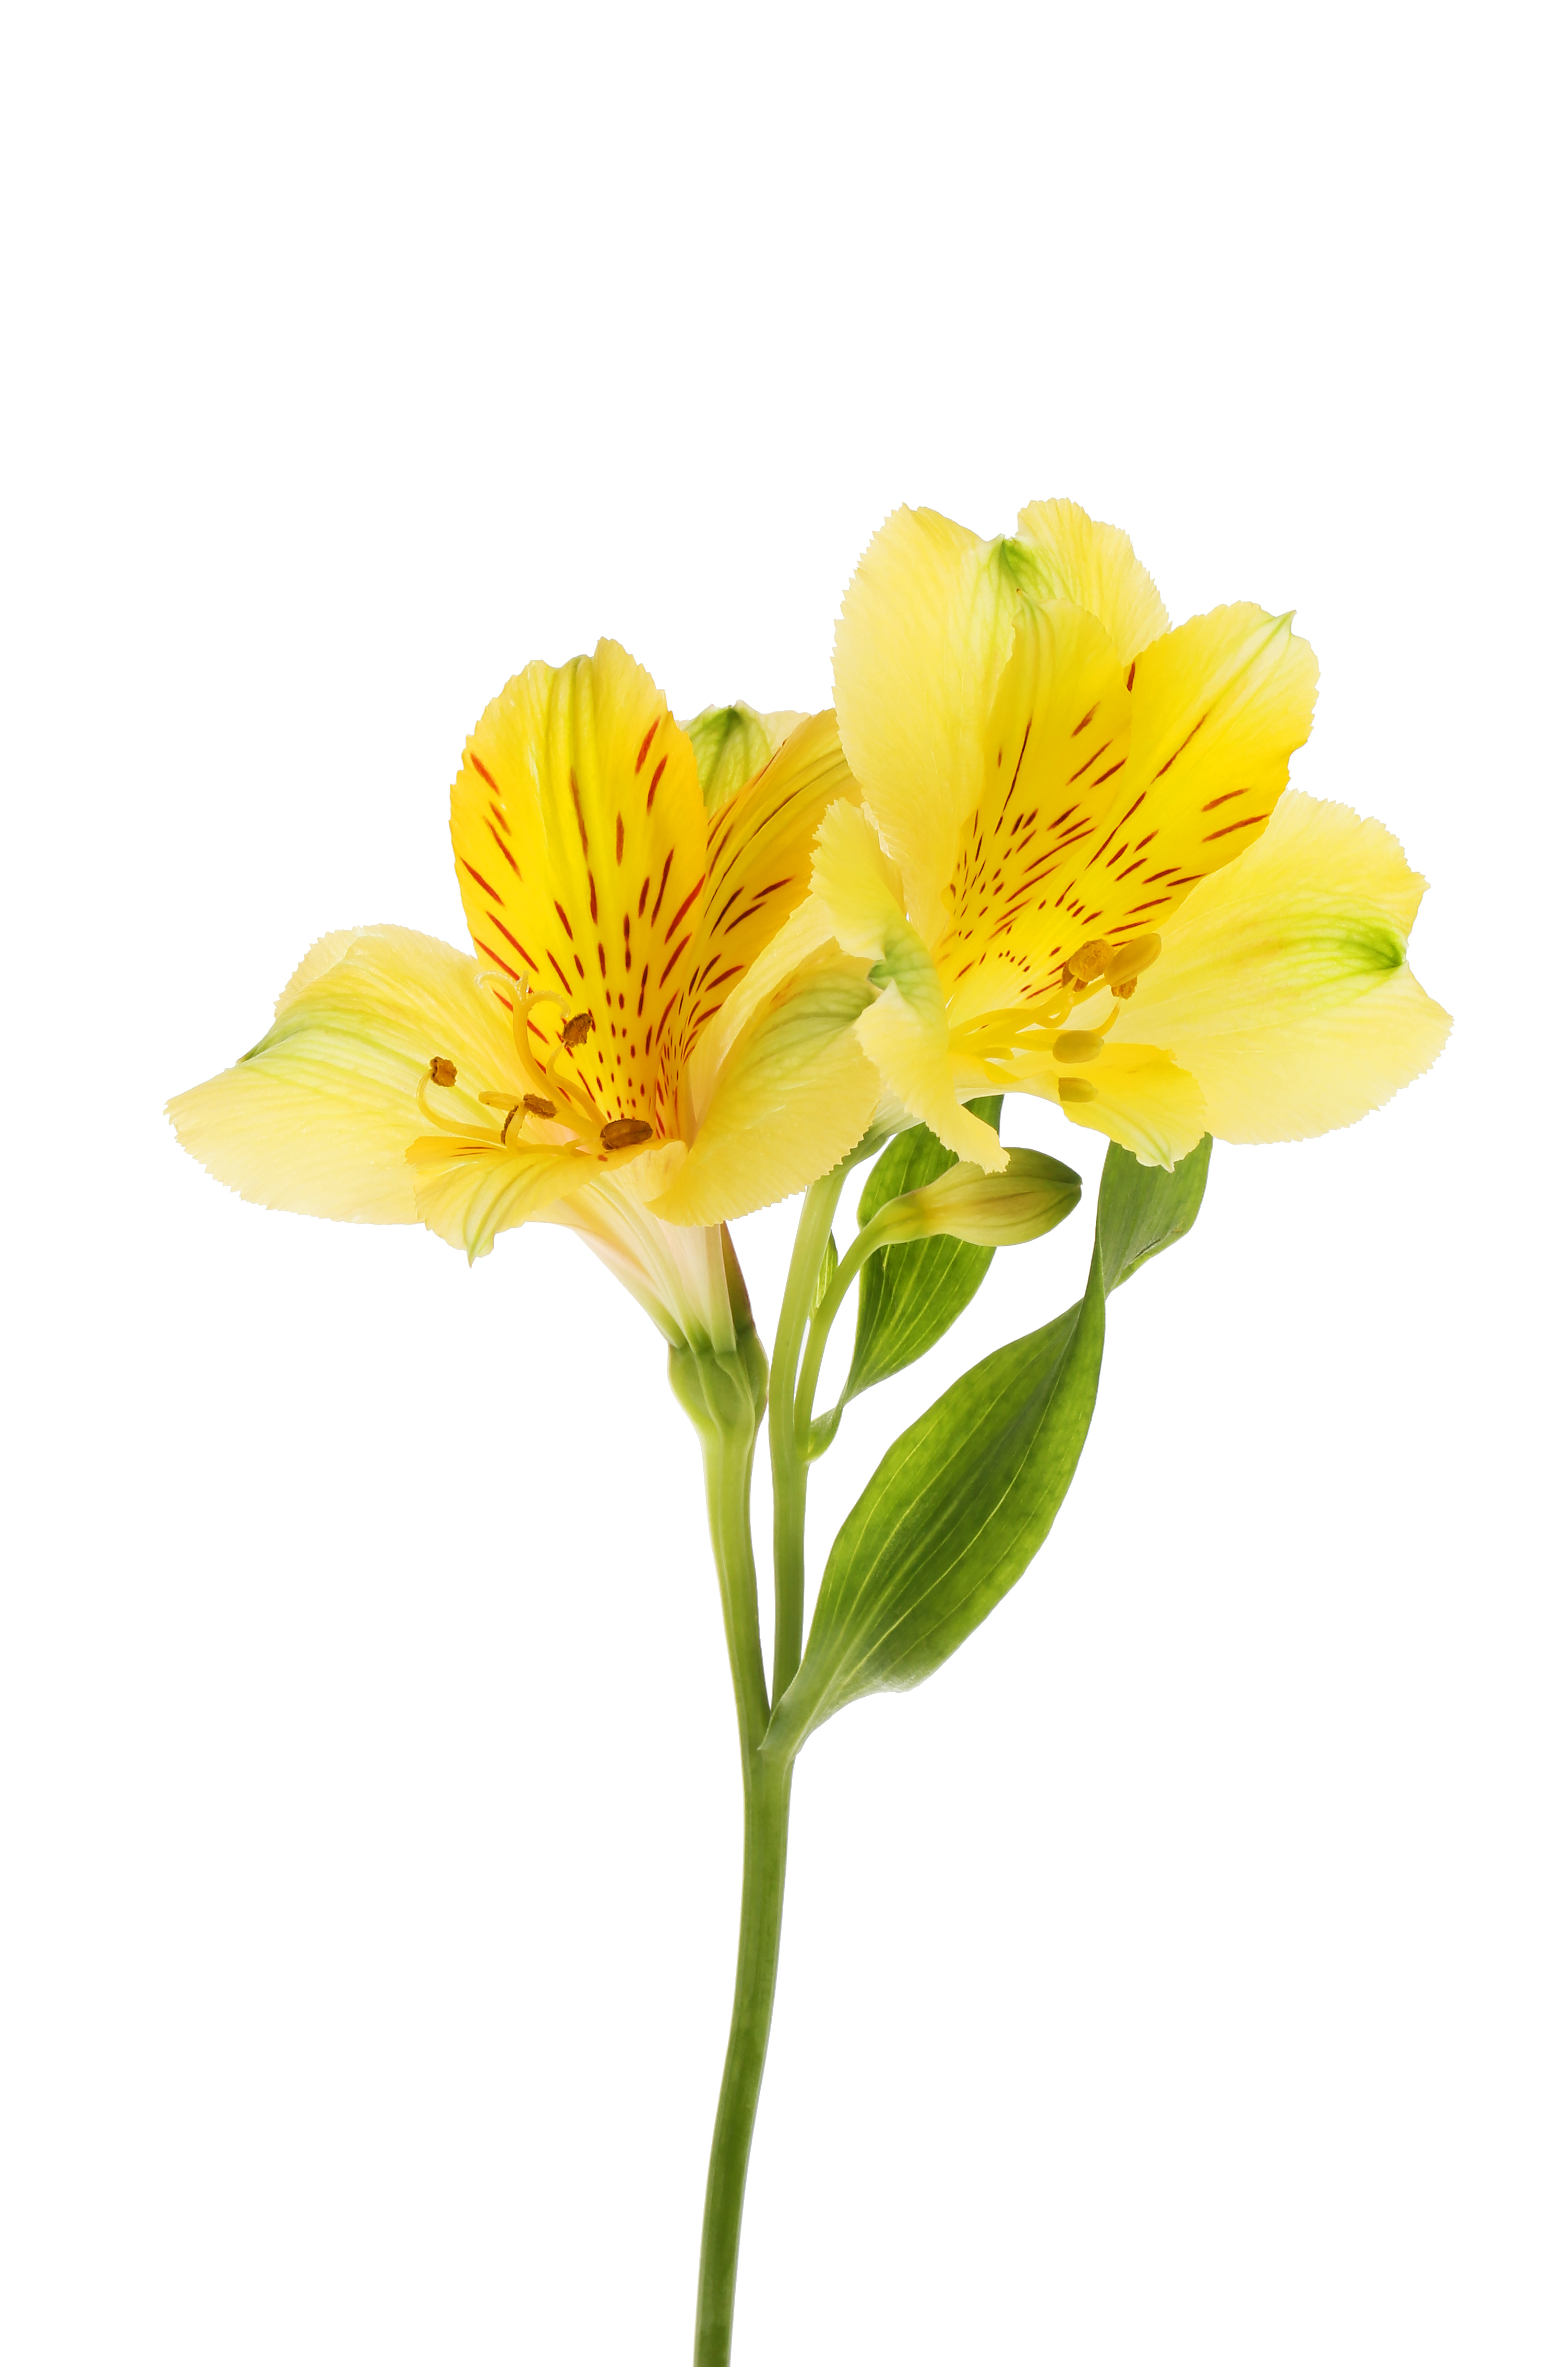 Two,Yellow,Alstroemeria,Flowers,Isolated,Against,White